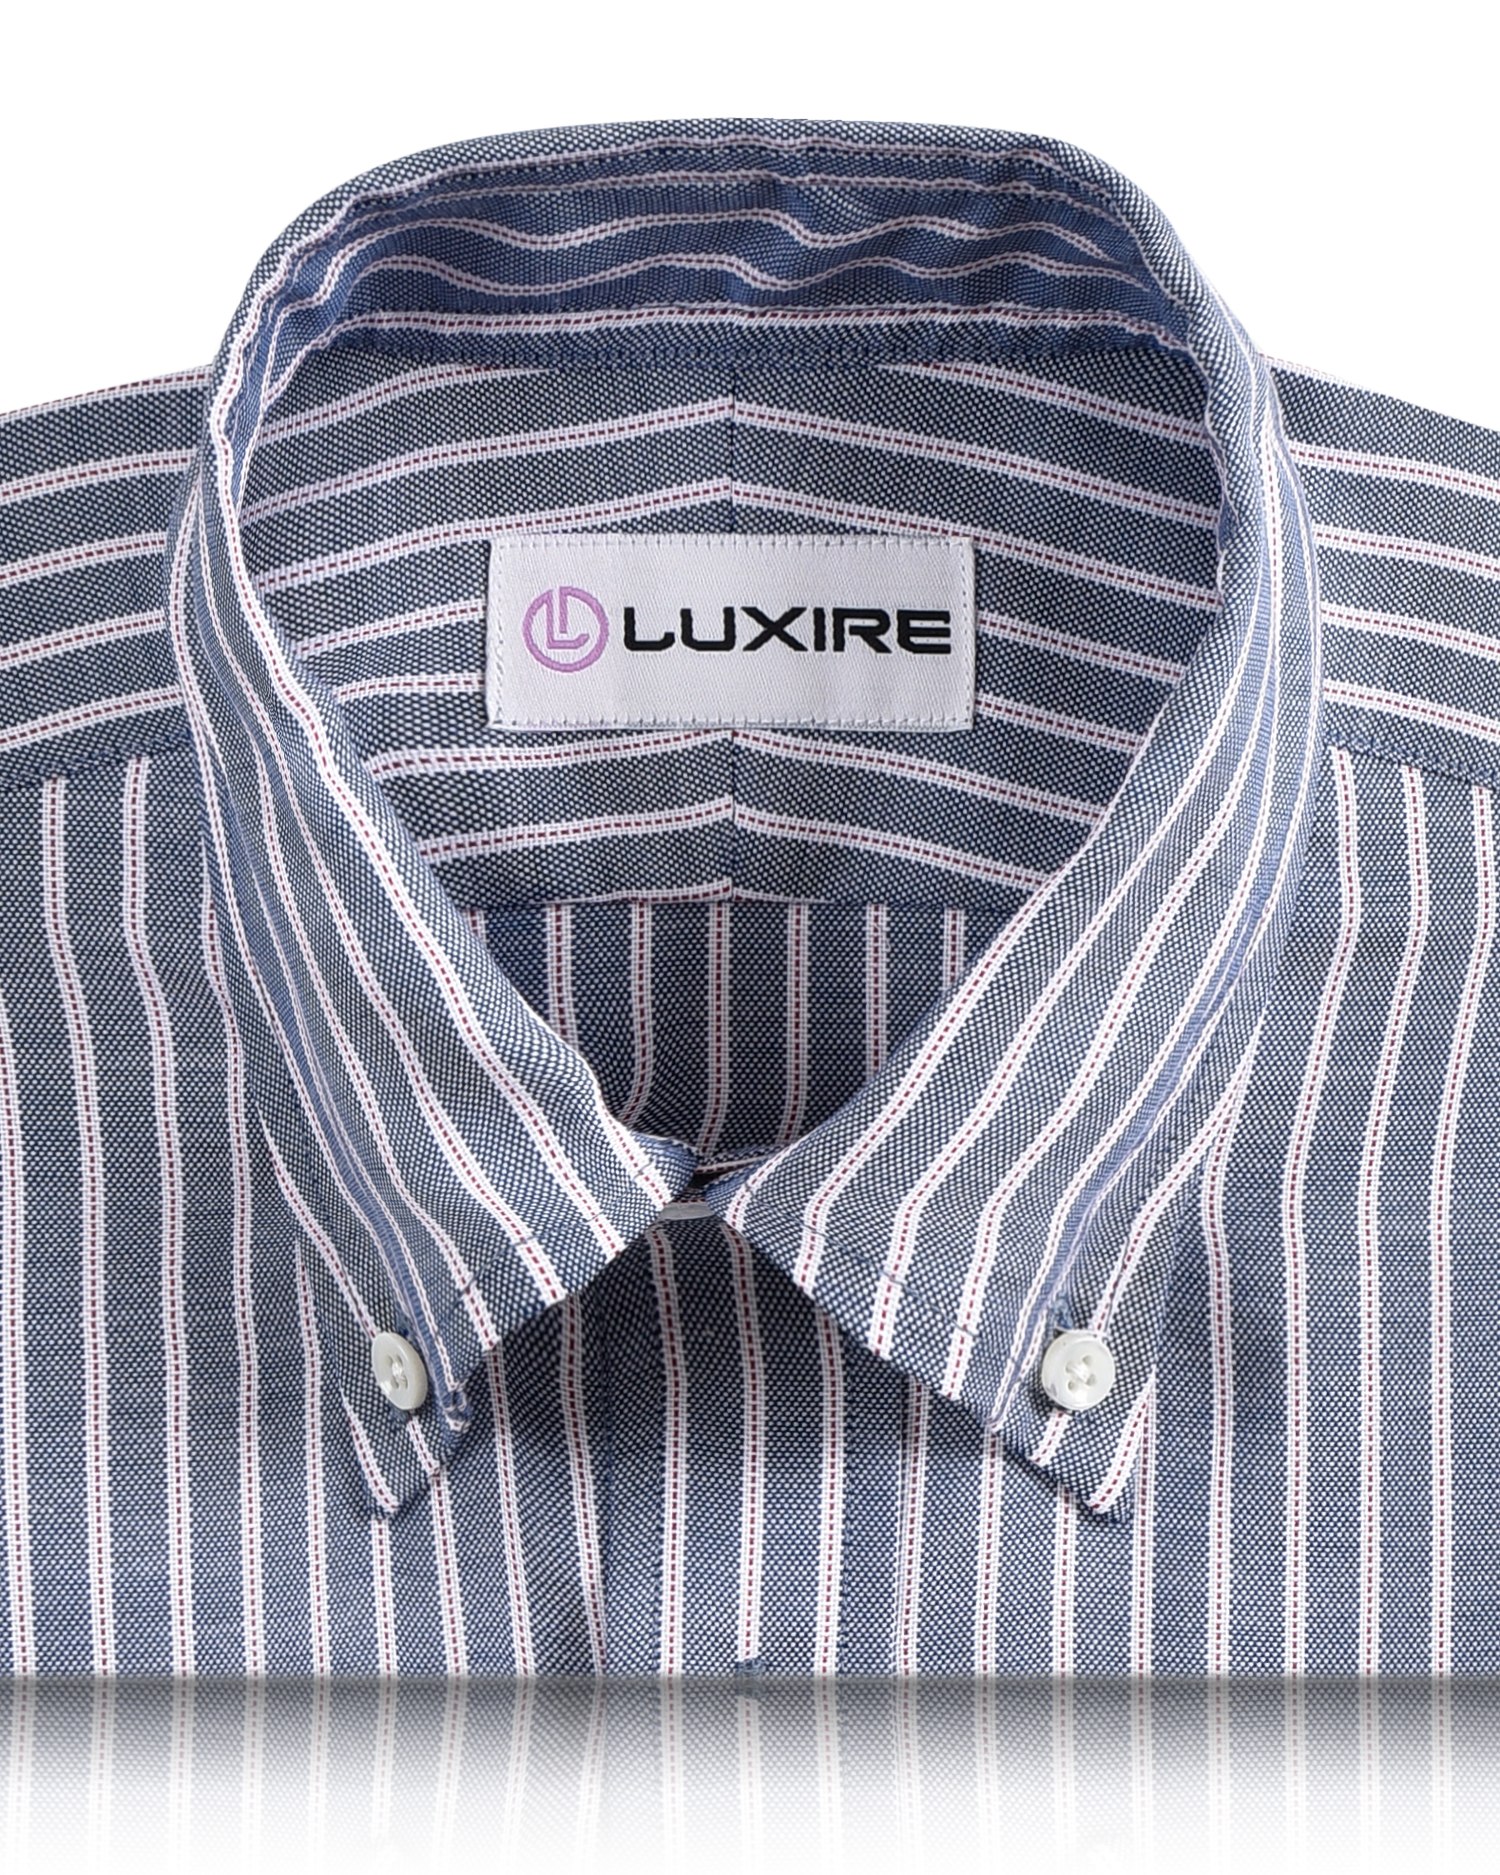 Collar of the custom oxford shirt for men by Luxire in navy awning with red pinstripes